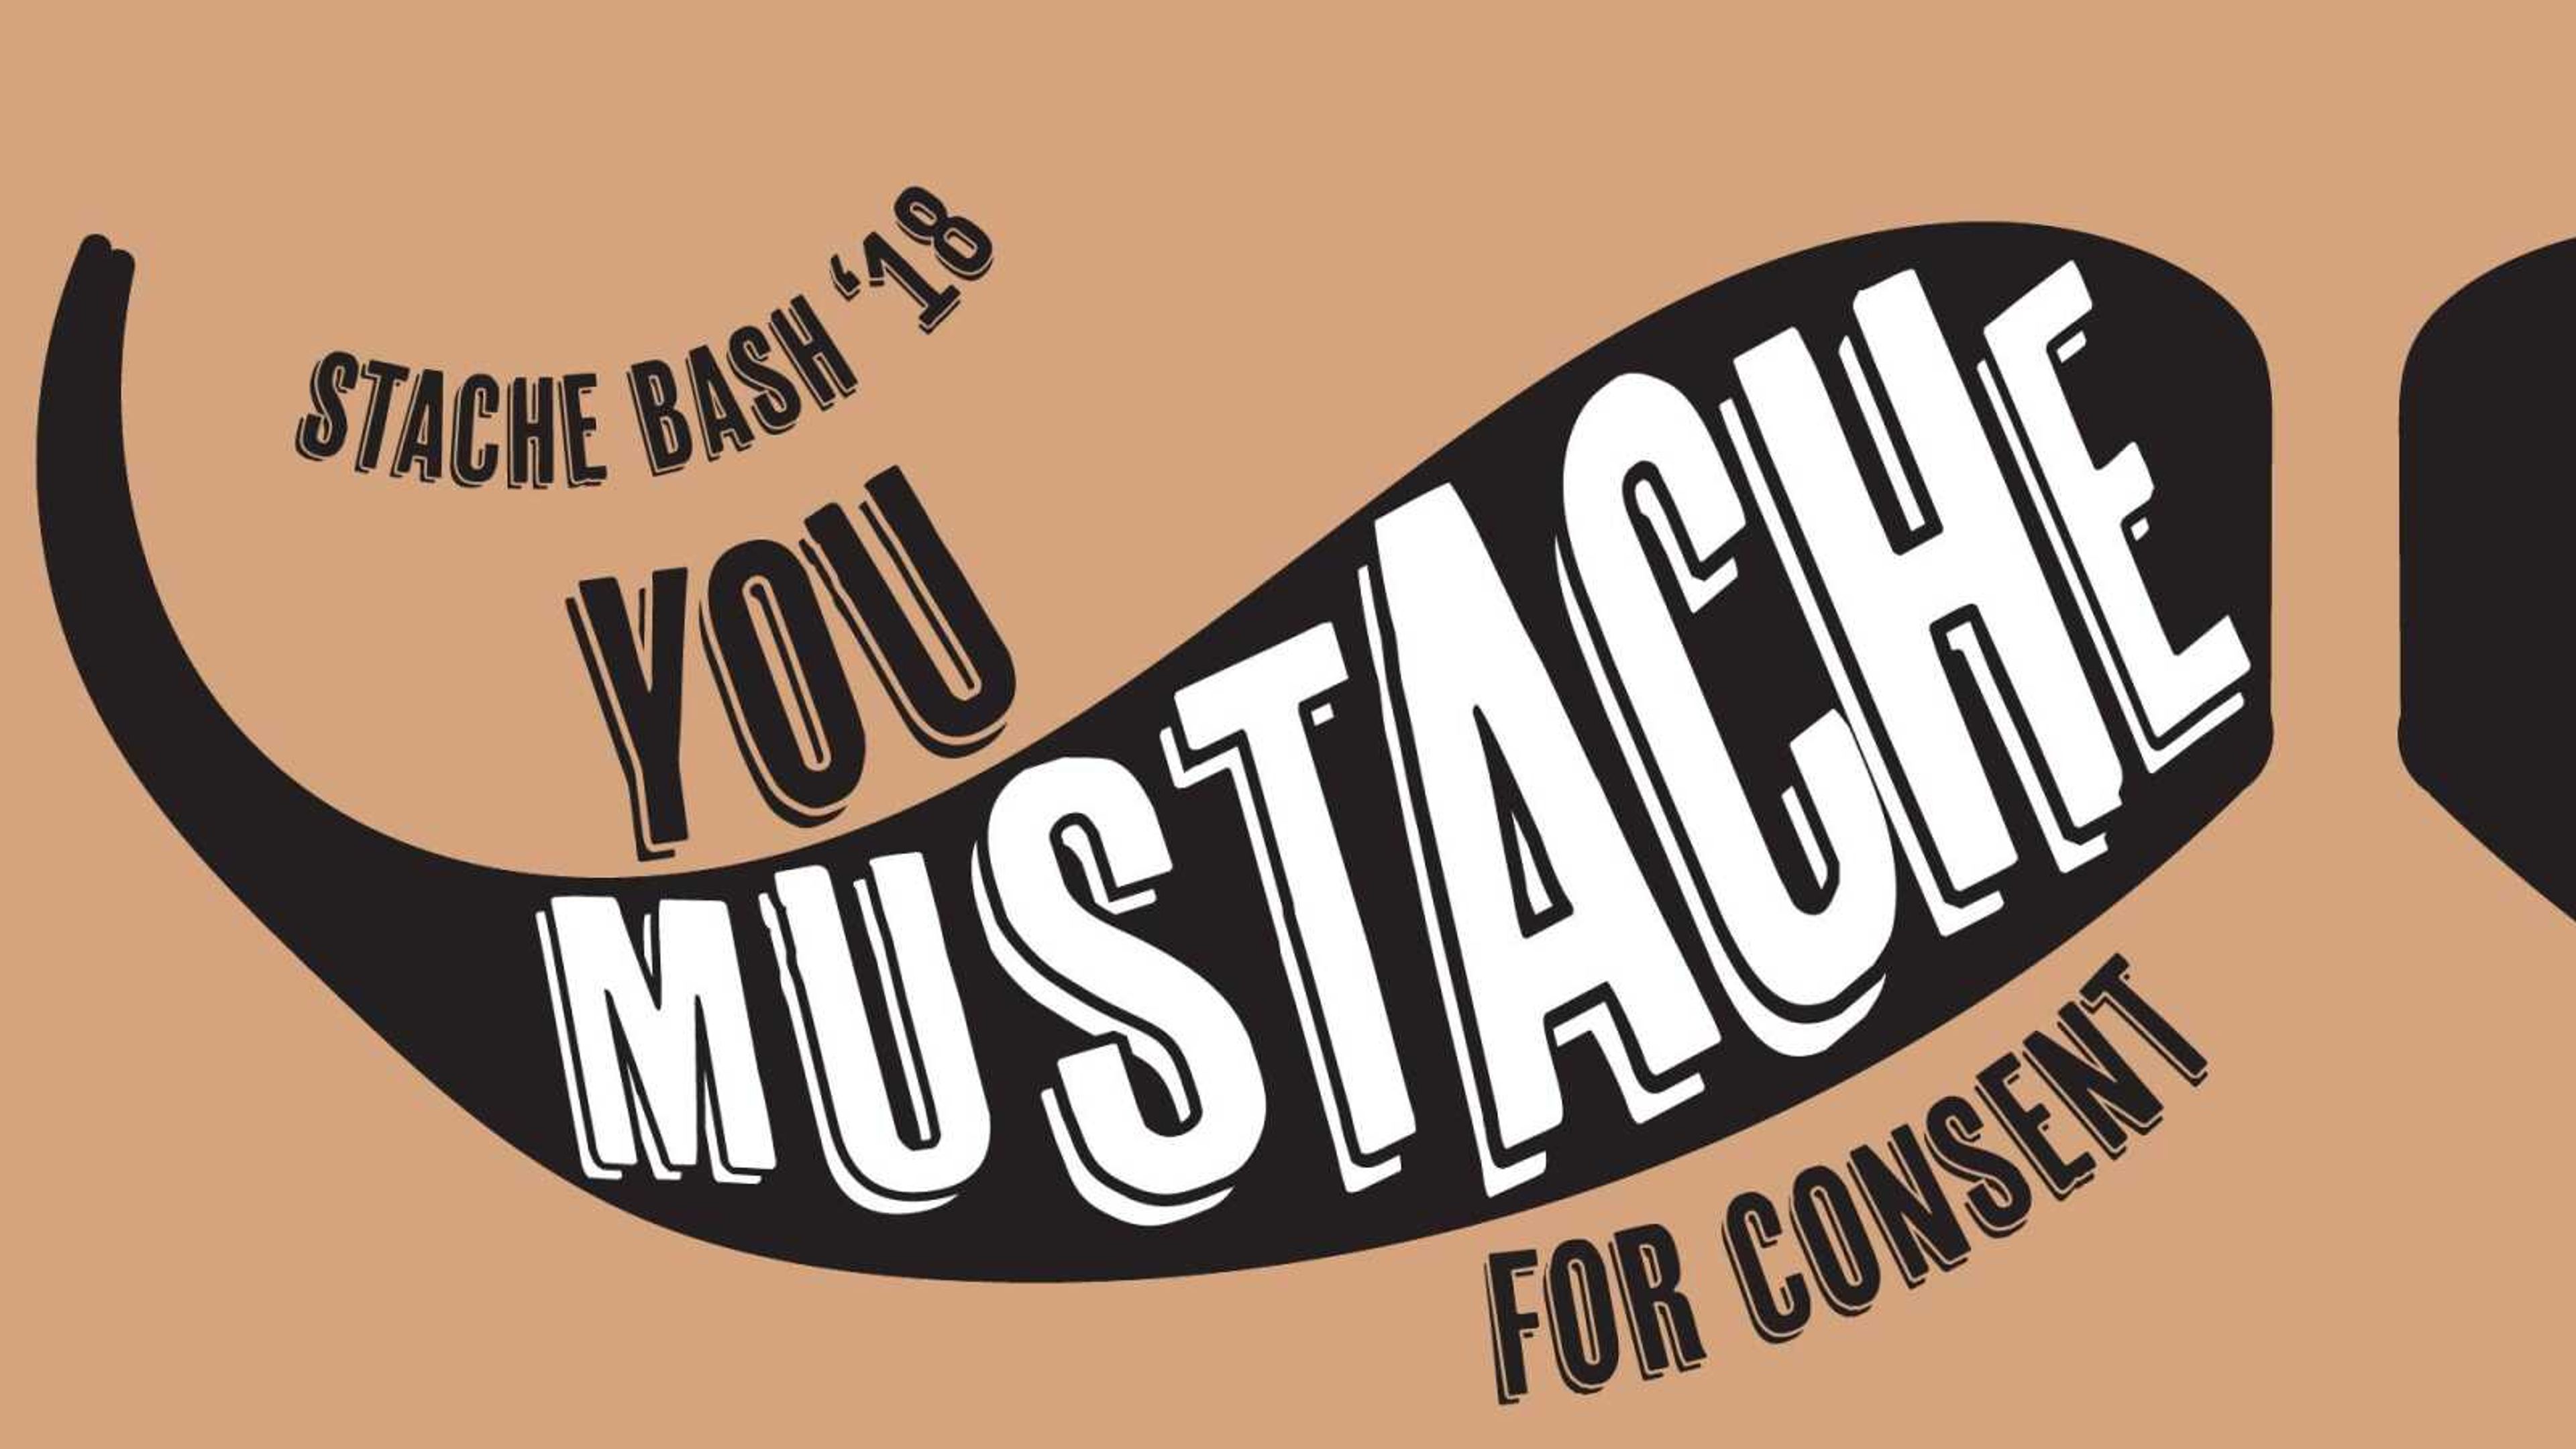 Annual Stache Bash promotes men as partners in prevention